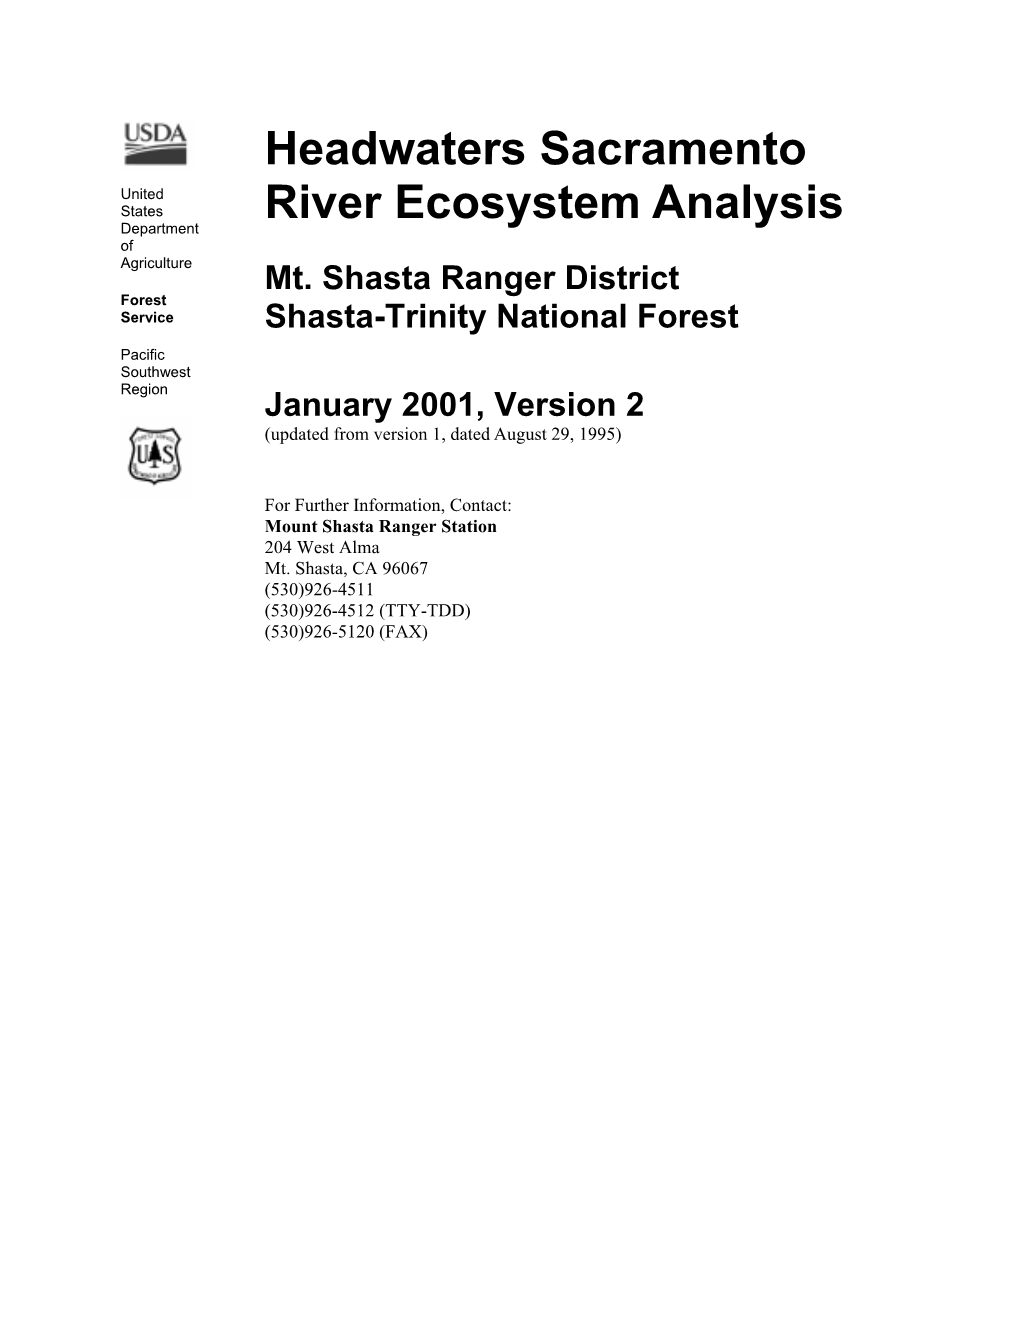 Headwaters Sacramento River Ecosystem Analysis - I Table of Contents